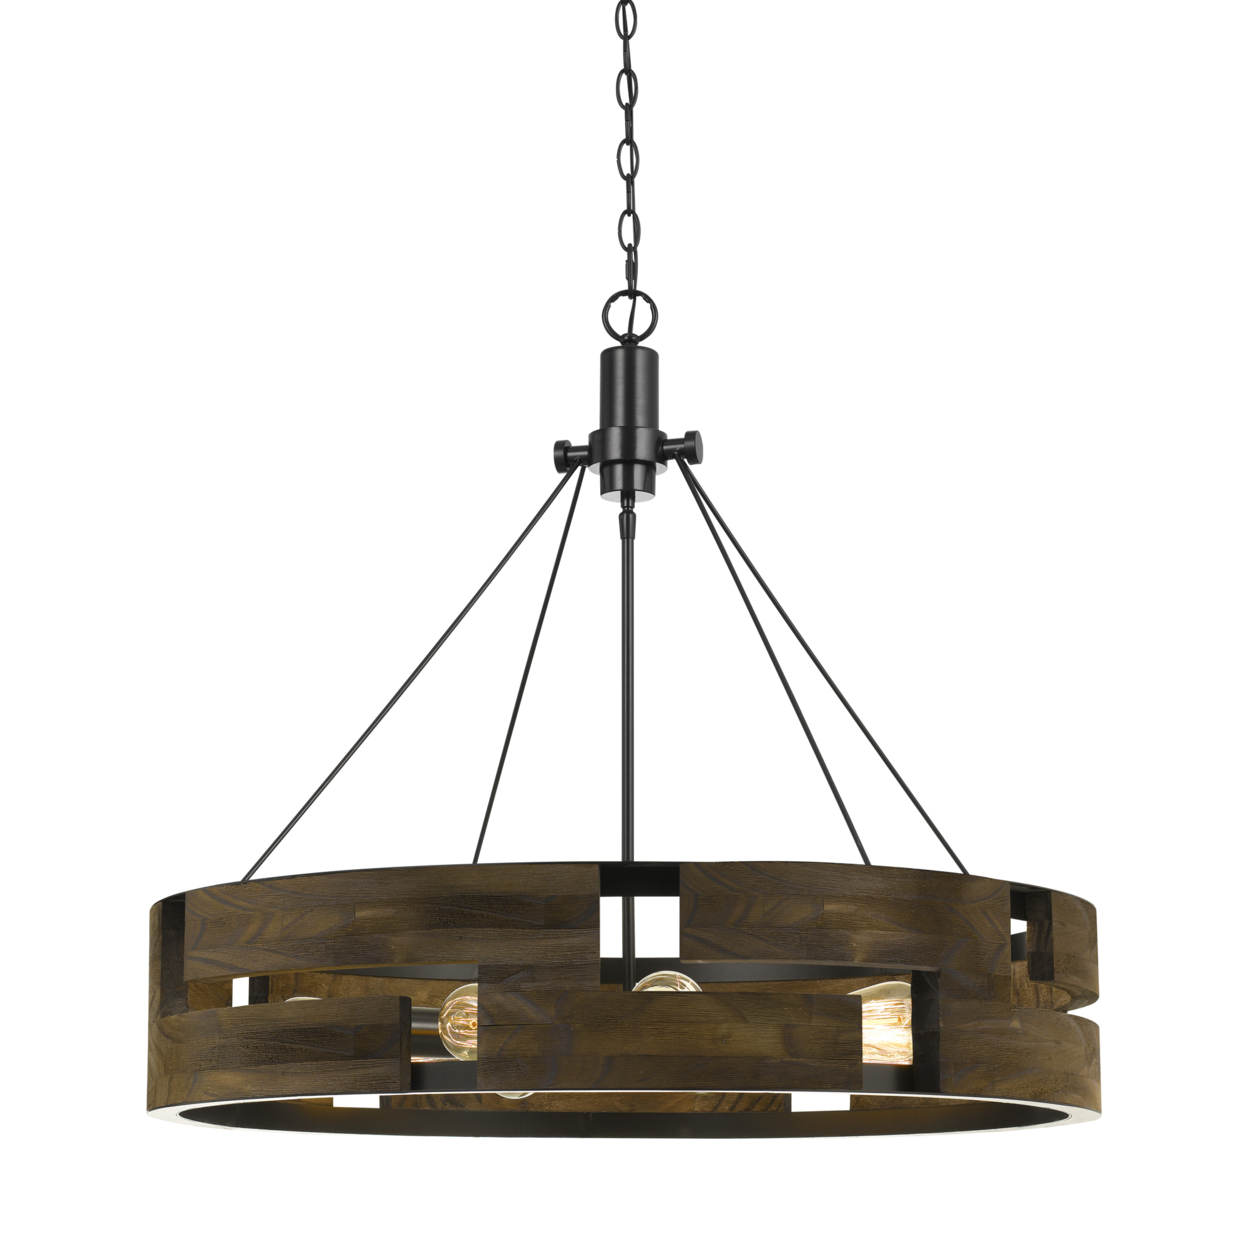 9 Bulb Round Wooden Frame Chandelier With Geometric Cut Out Design, Brown- Saltoro Sherpi